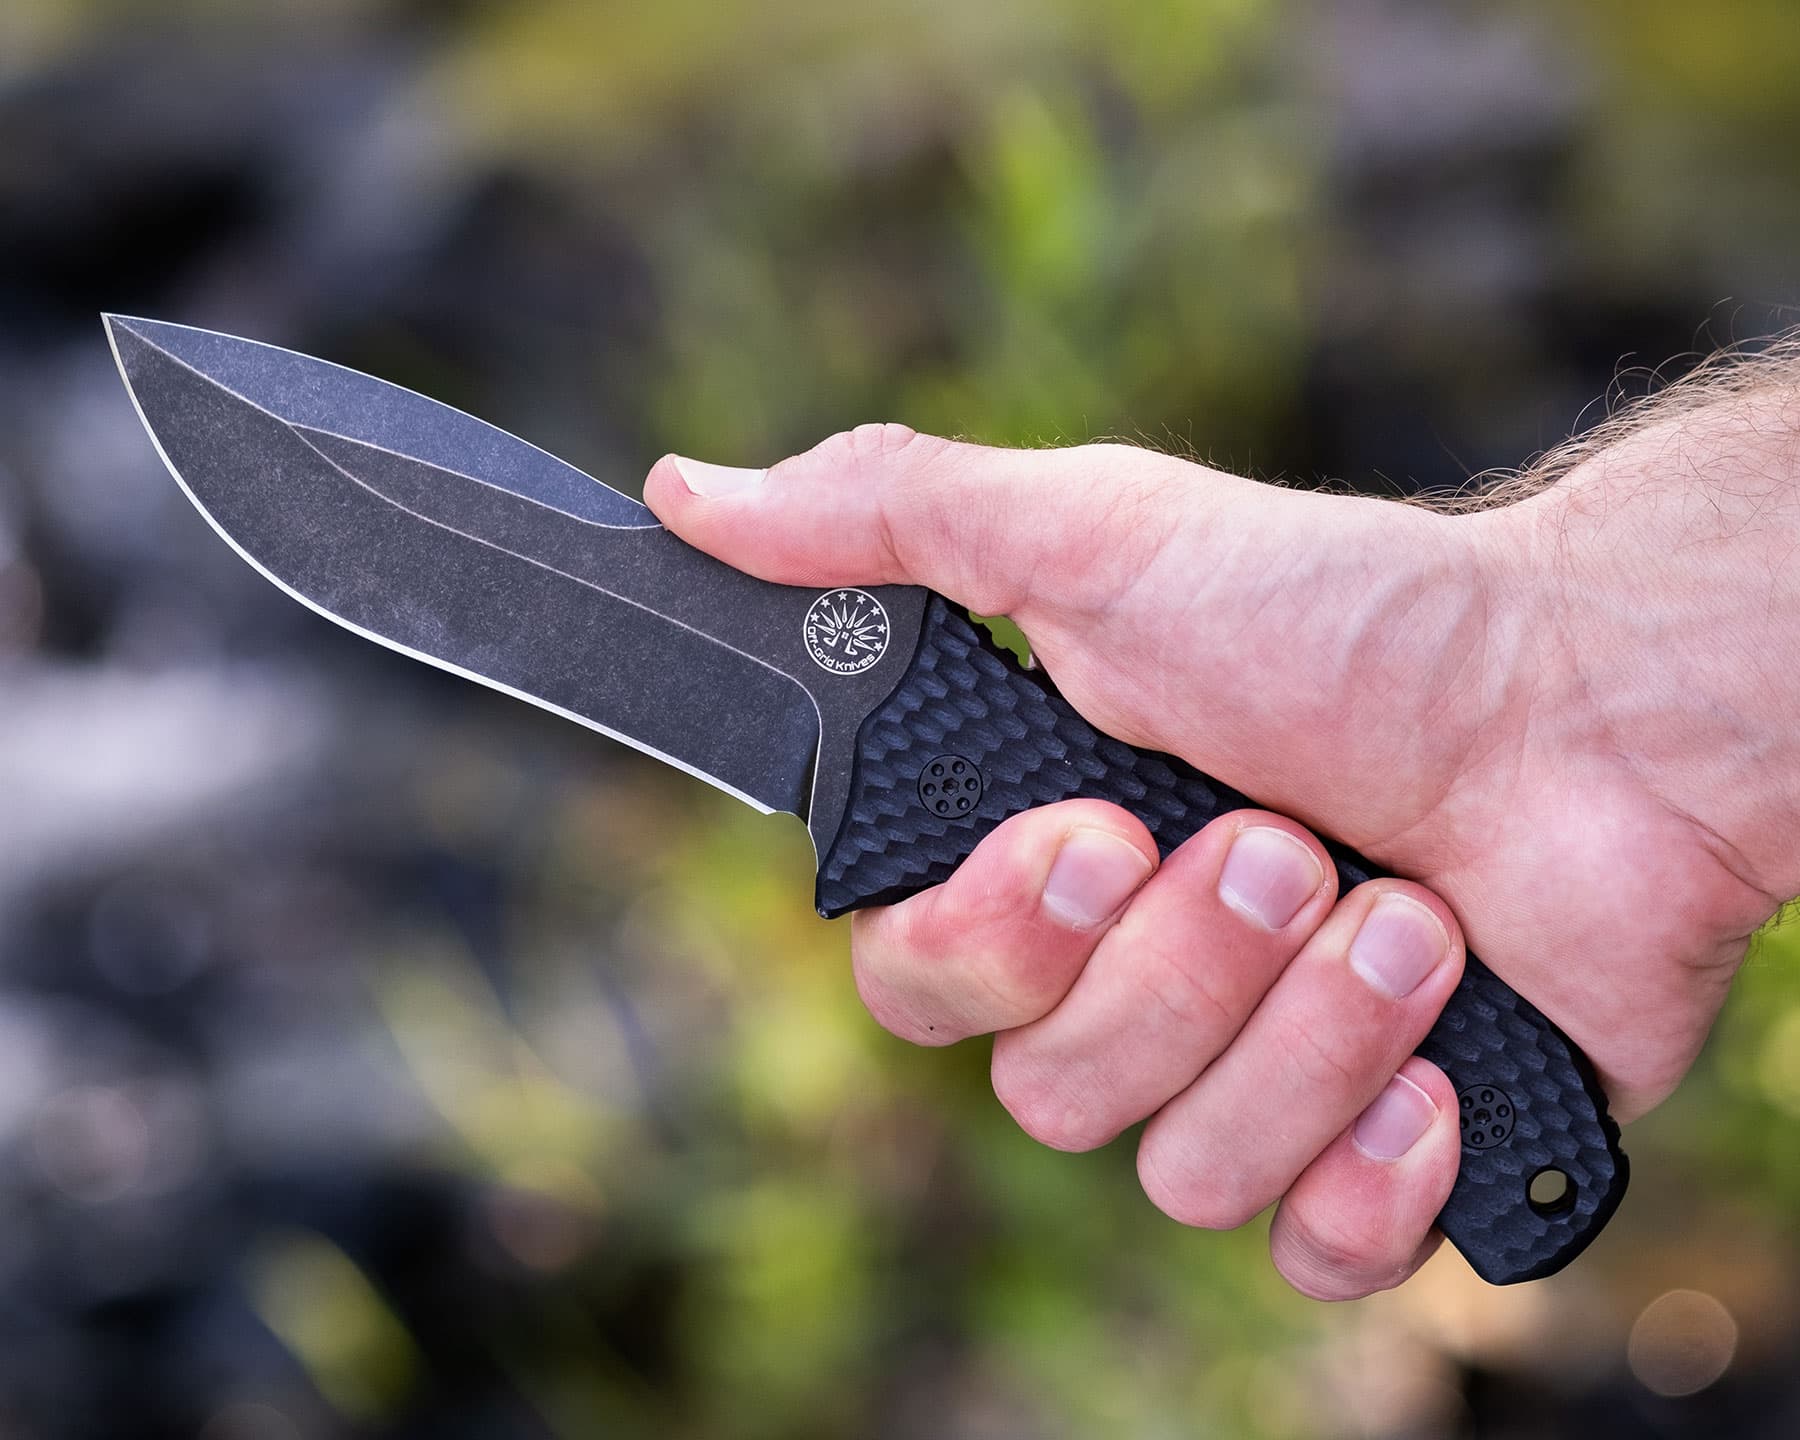 The handle ergonomics of the V2 Backcountry make it possible to comfortably use the knife for hard use tasks. 